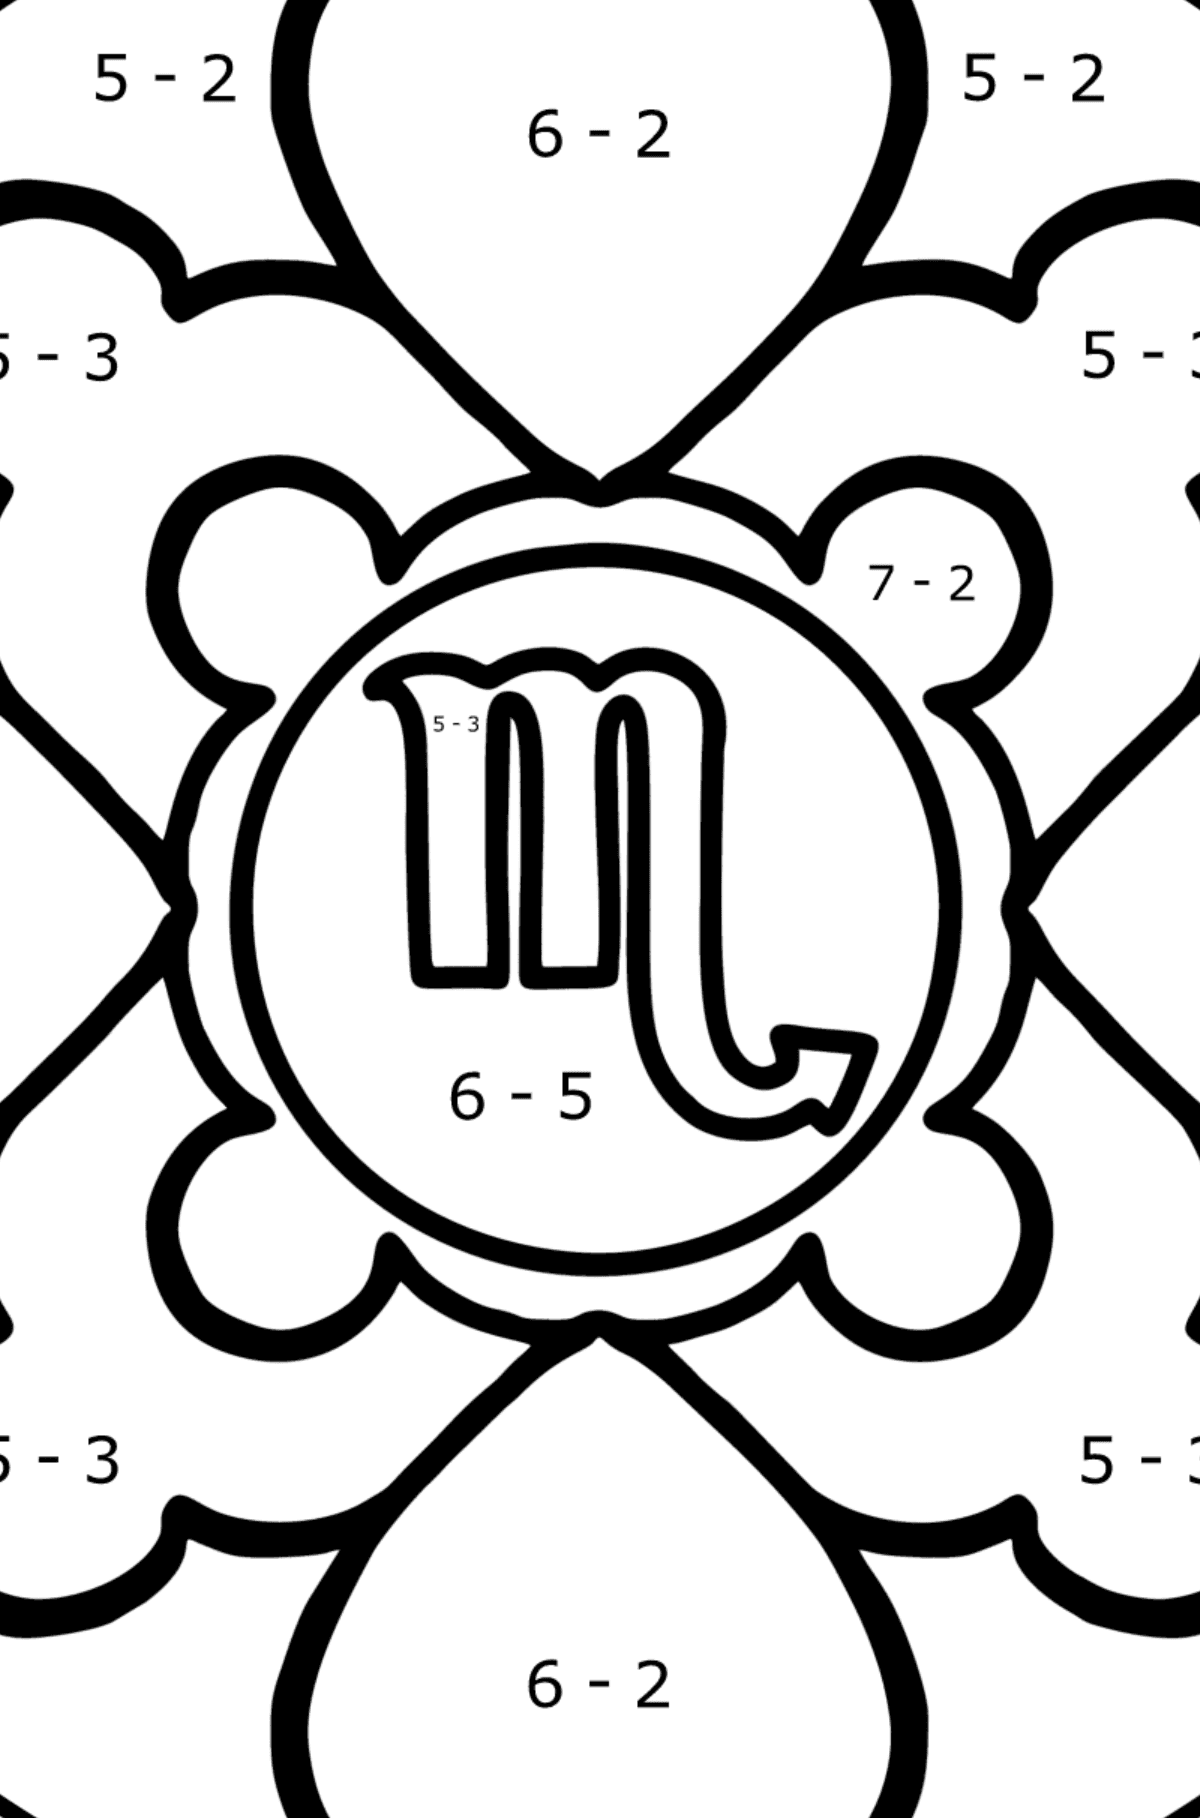 Coloring page - zodiac sign Scorpio - Math Coloring - Subtraction for Kids